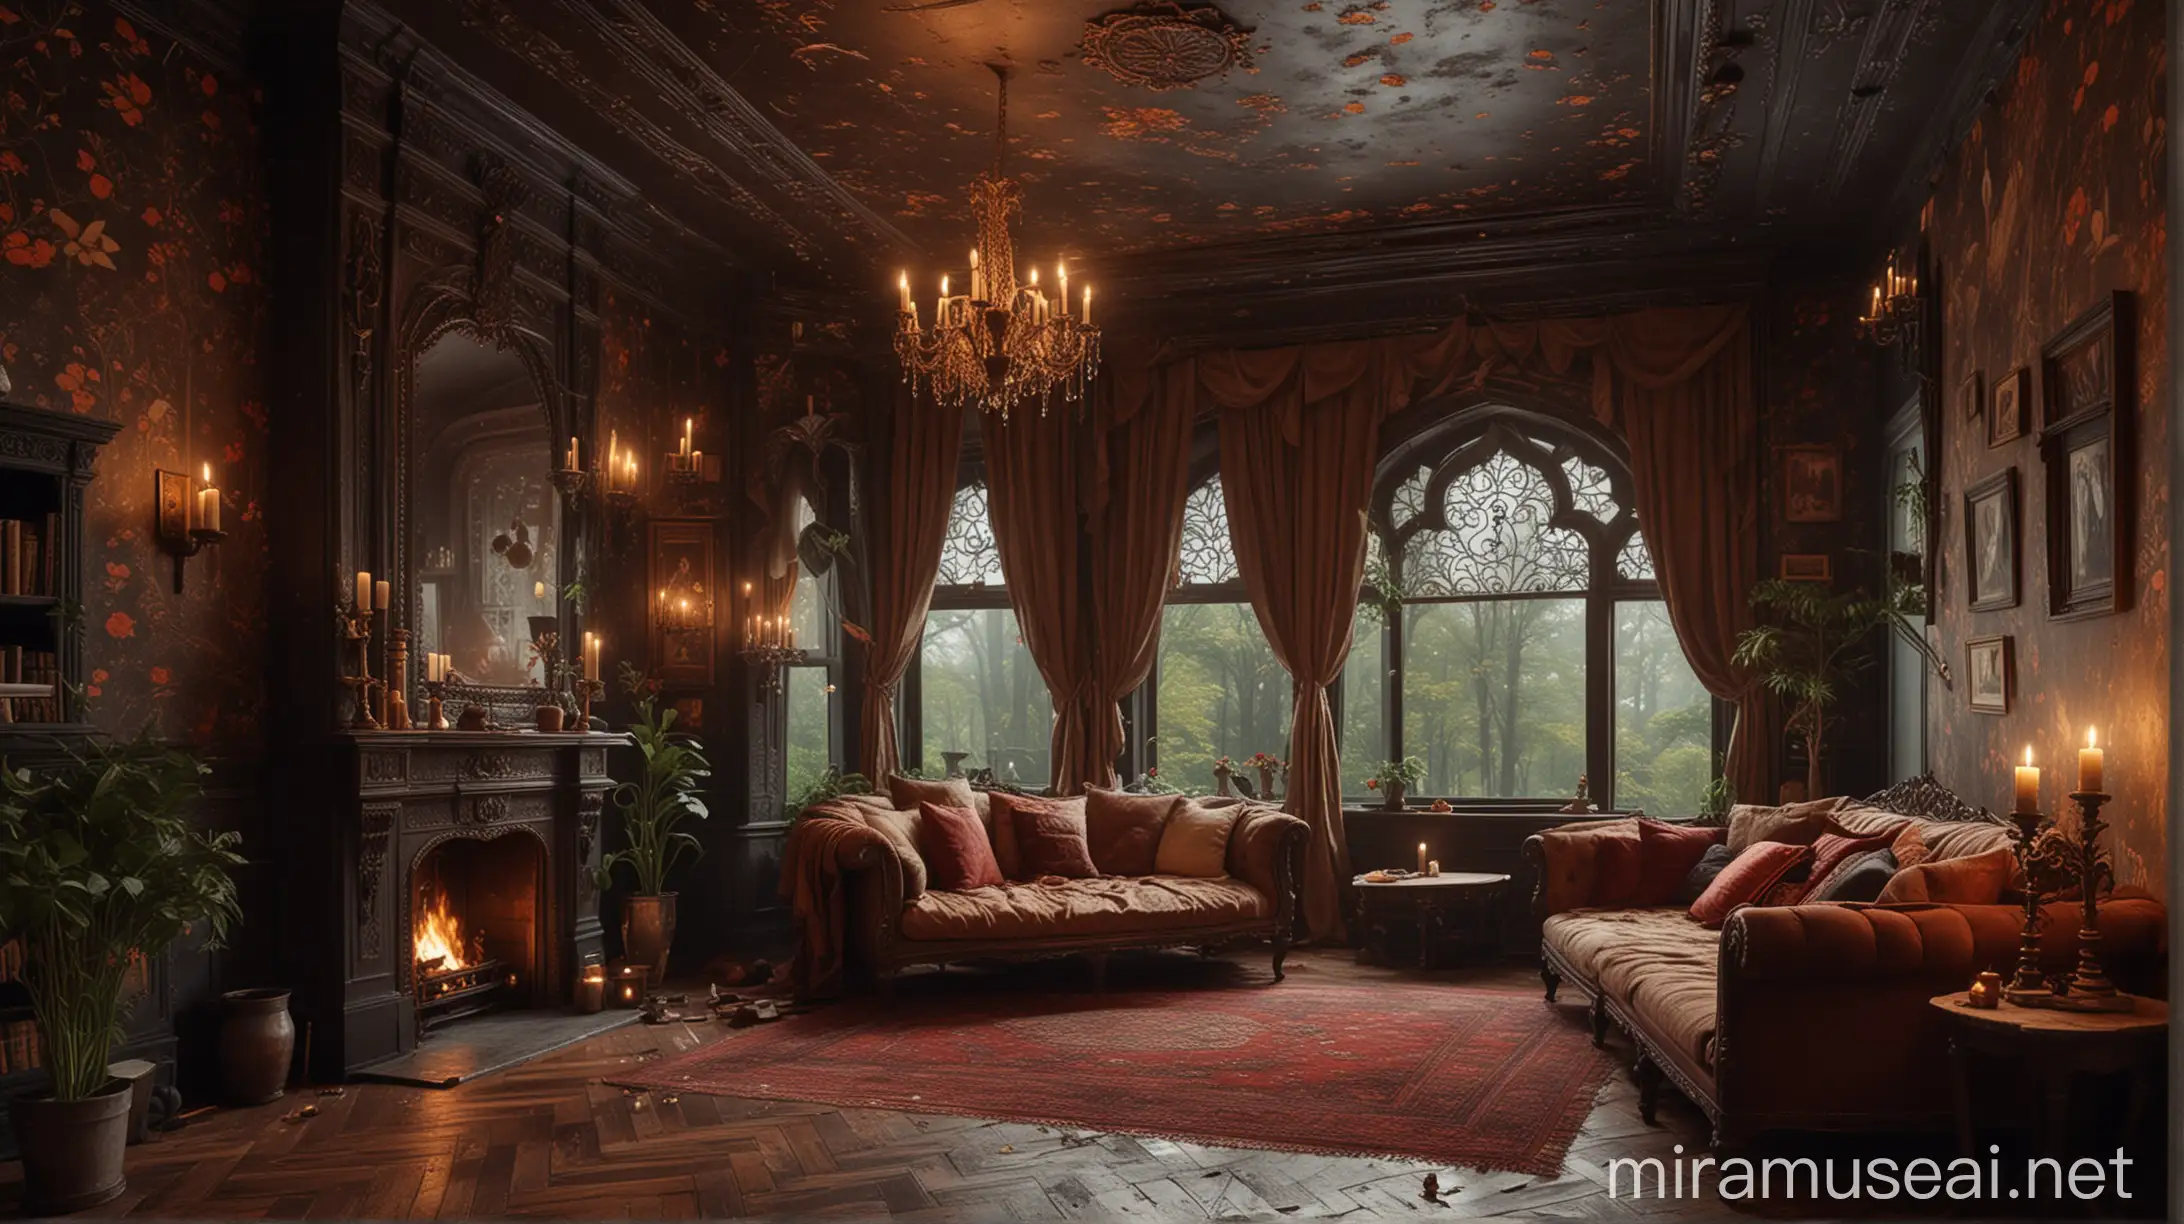 Cozy Castle Royal Mahal inside, with two small cozy plant, pillows, Excellently decorated in royal style badroom, a fireplace, big window with a rainy fall night deep forest view., Mysterious badroom candle a badroom with a arafed room with a fireplace and a bed in it, cozy place, cosy atmoshpere, cozy environment, gothic epic library, gothic mansion badroom, cozy room, cozy and peaceful atmosphere, gothic epic library concept, cozy setting, cosy enchanted scene, magical environment, gothic library, cozy atmospheric, warm interior, castle library, cozy wallpaper, relaxing concept art royal style Fireplace Curved Ceiling Large Bad monsoon rainy weather